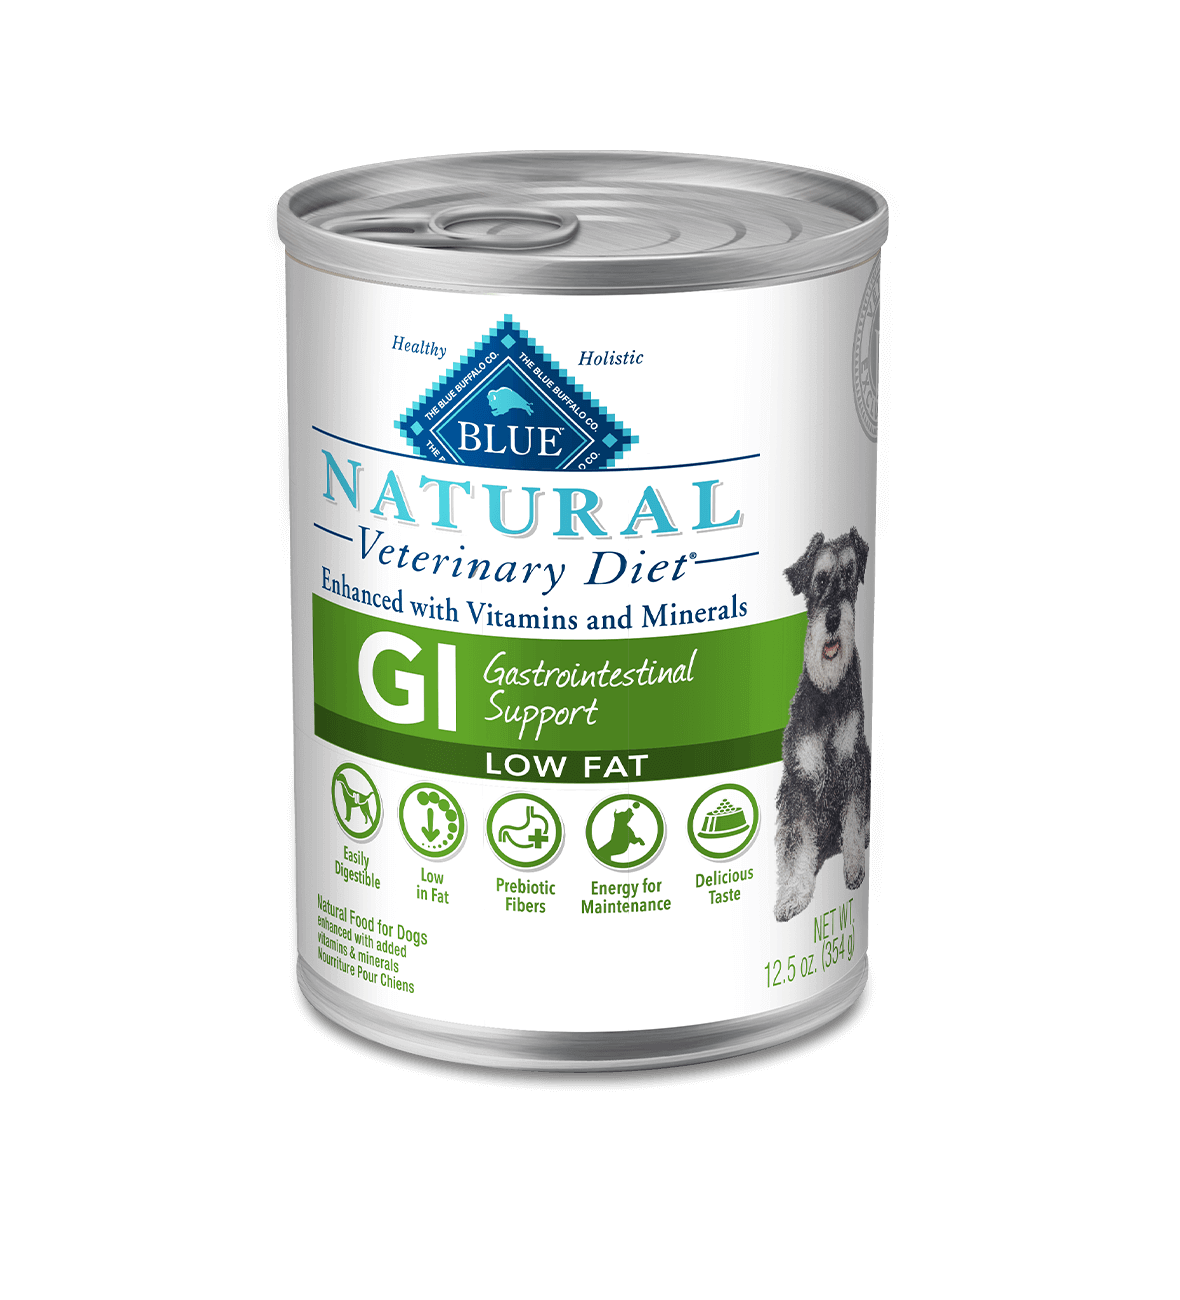 blue natural veterinary diet gi gastrointestinal support low fat dog wet food